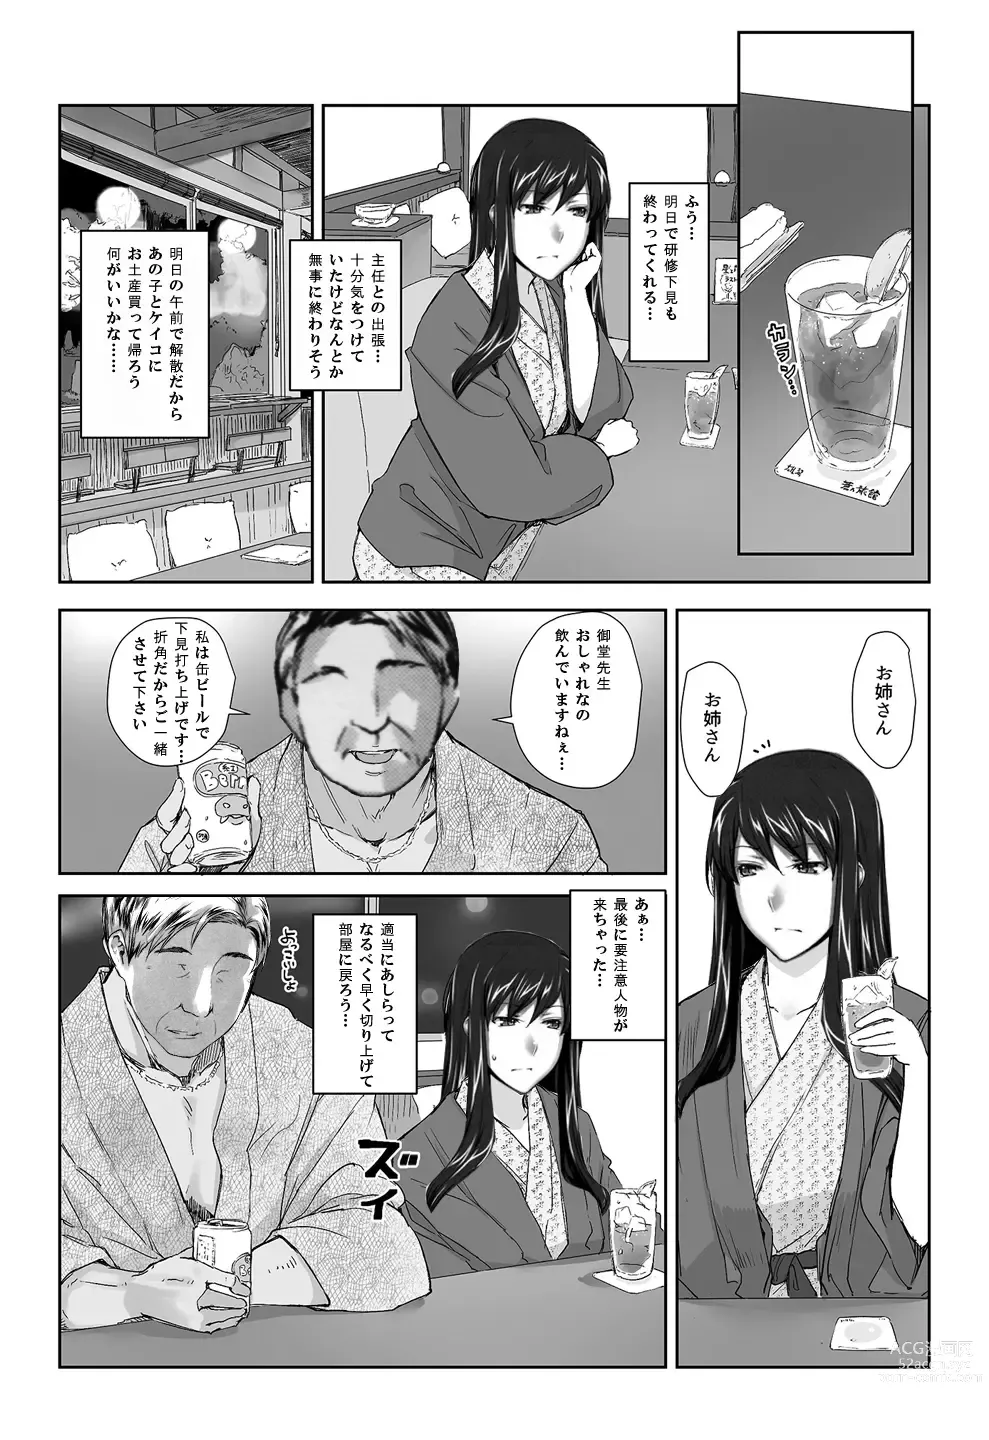 Page 3 of doujinshi Sakiko-san in delusion Vol.8 revised ~Sakiko-sans circumstance at an educational training Route3~ (collage) (Continue to “First day of study trip” (page 42) of Vol.1)